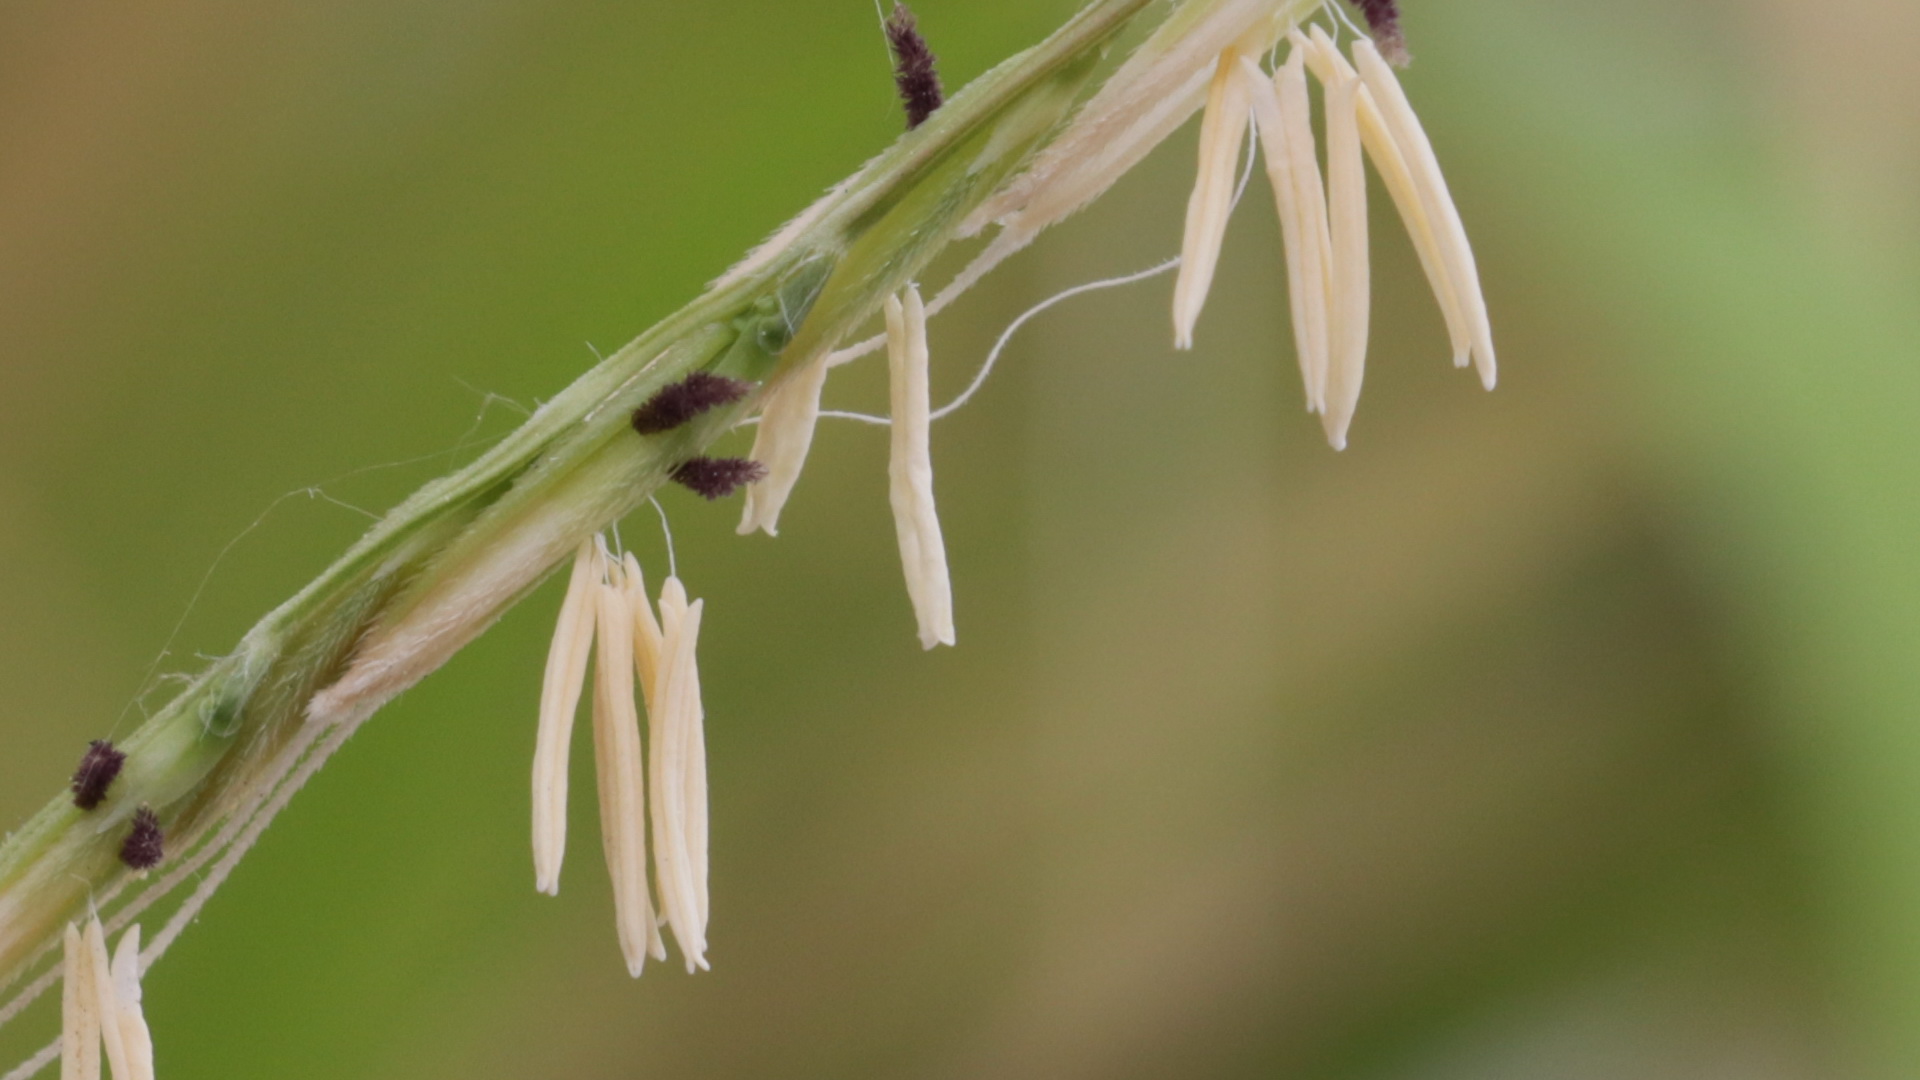 Oryza longistaminata is now also flowering in the glasshouse